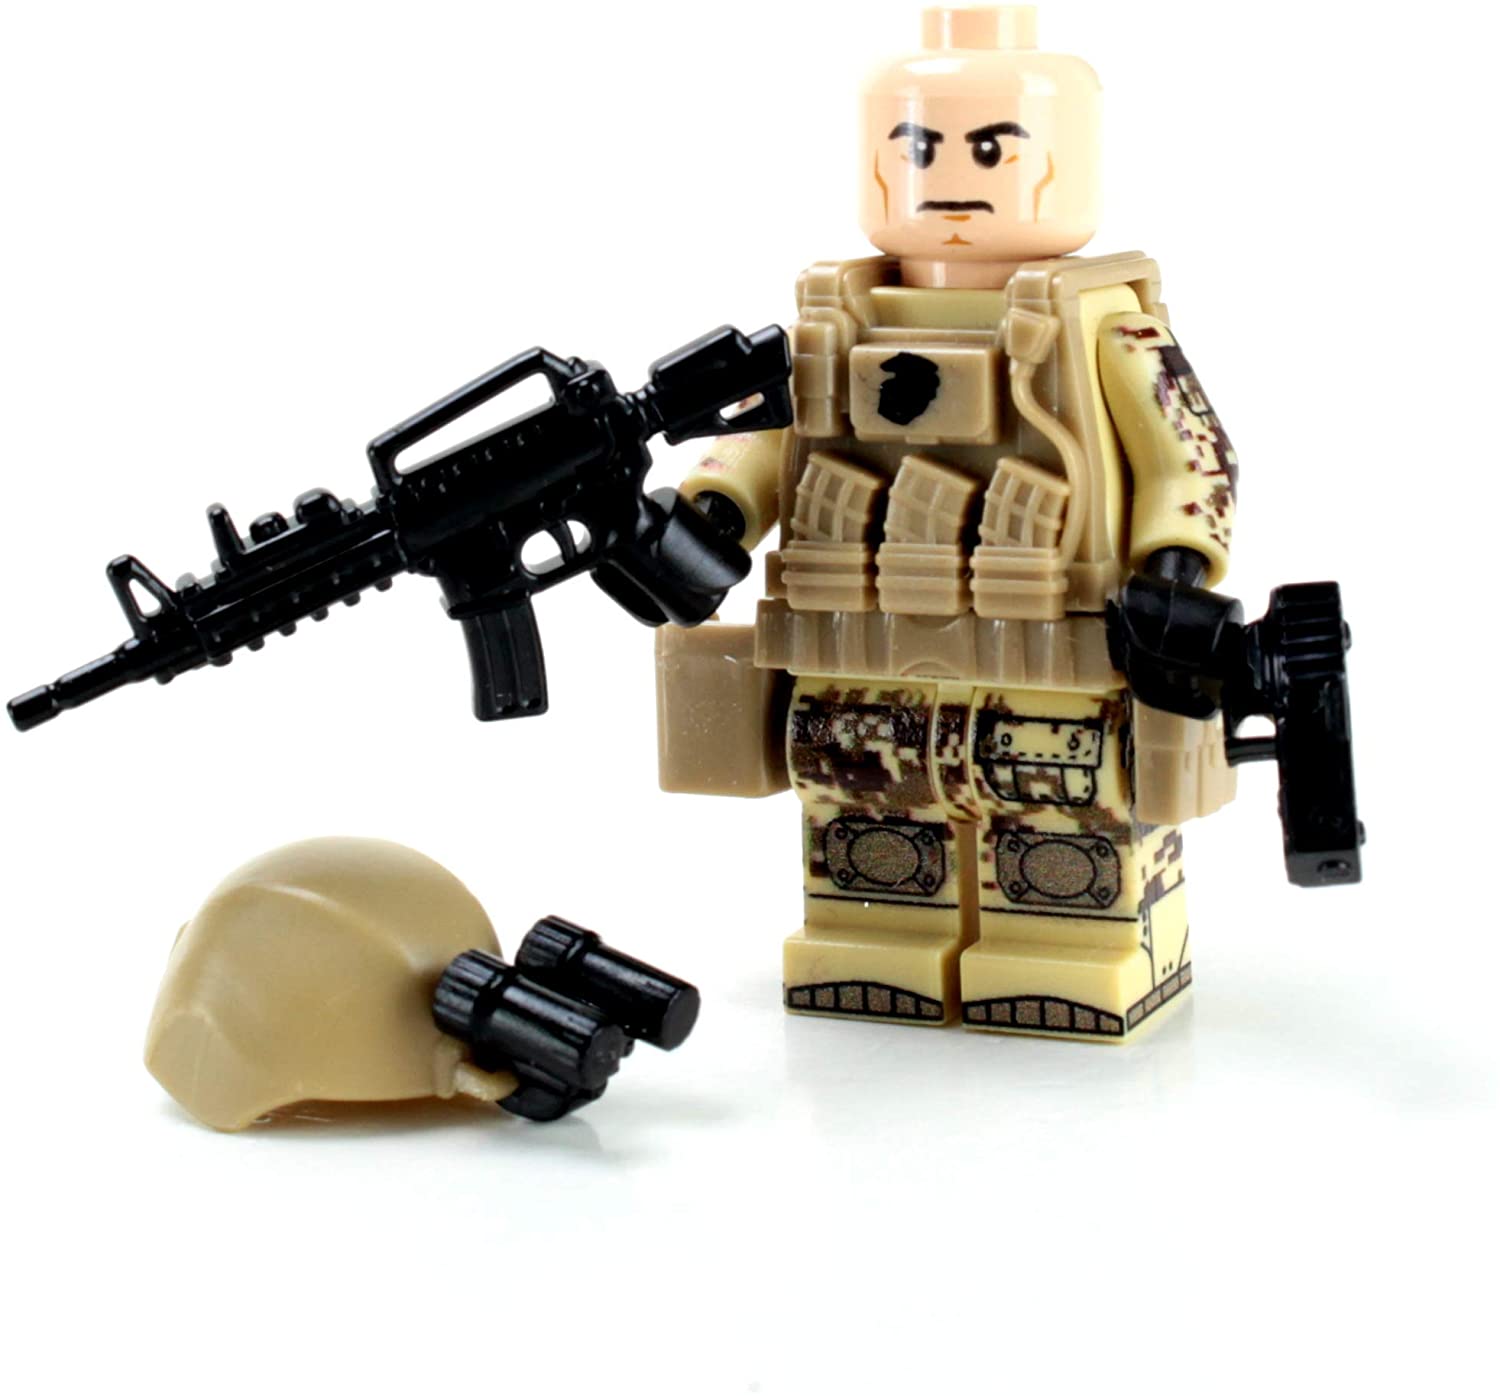 Sentimental, Stunning and Unique Lego Soldiers 